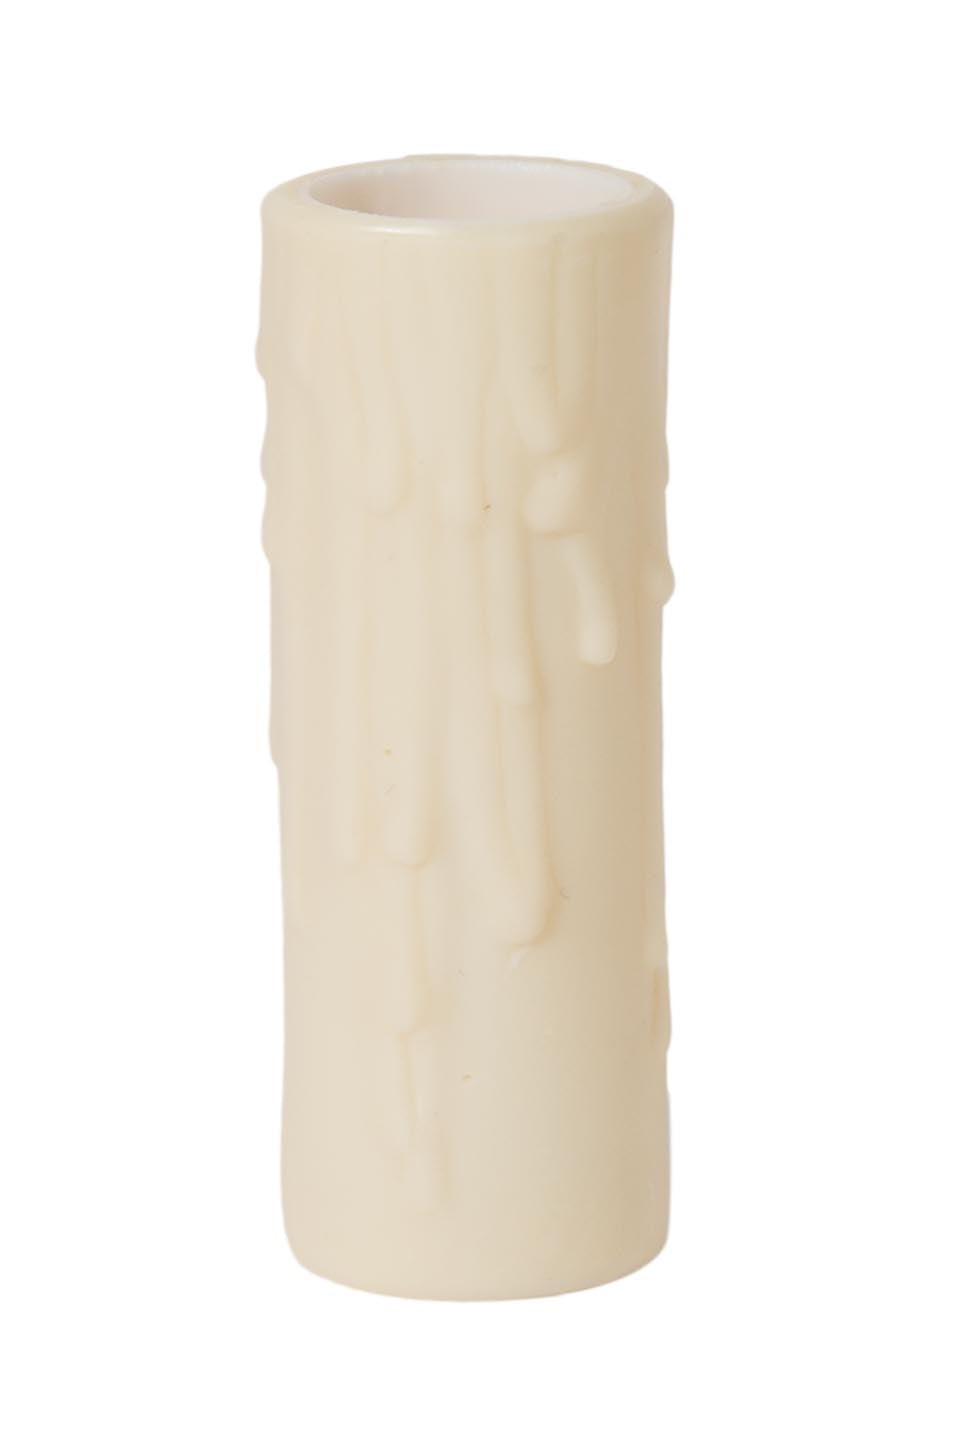 Cream Color Polybeeswax Candle Cover, Medium Size, Choice of Height 